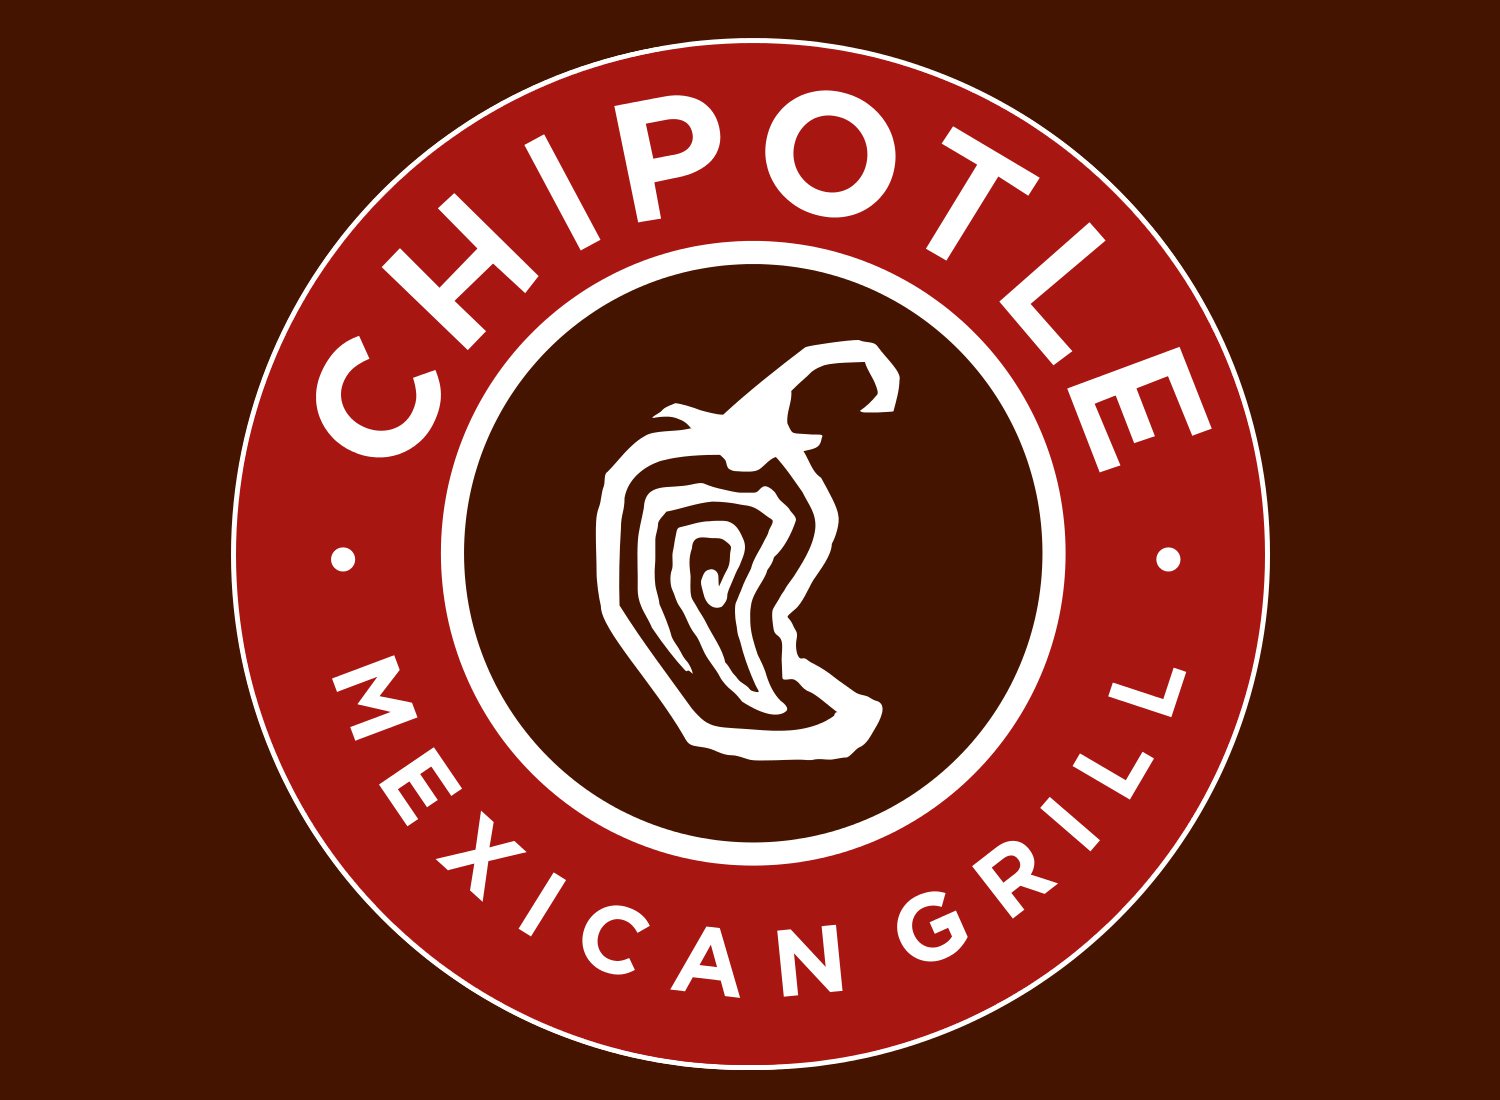 Chipotle Logo, Chipotle Symbol, Meaning, History and Evolution